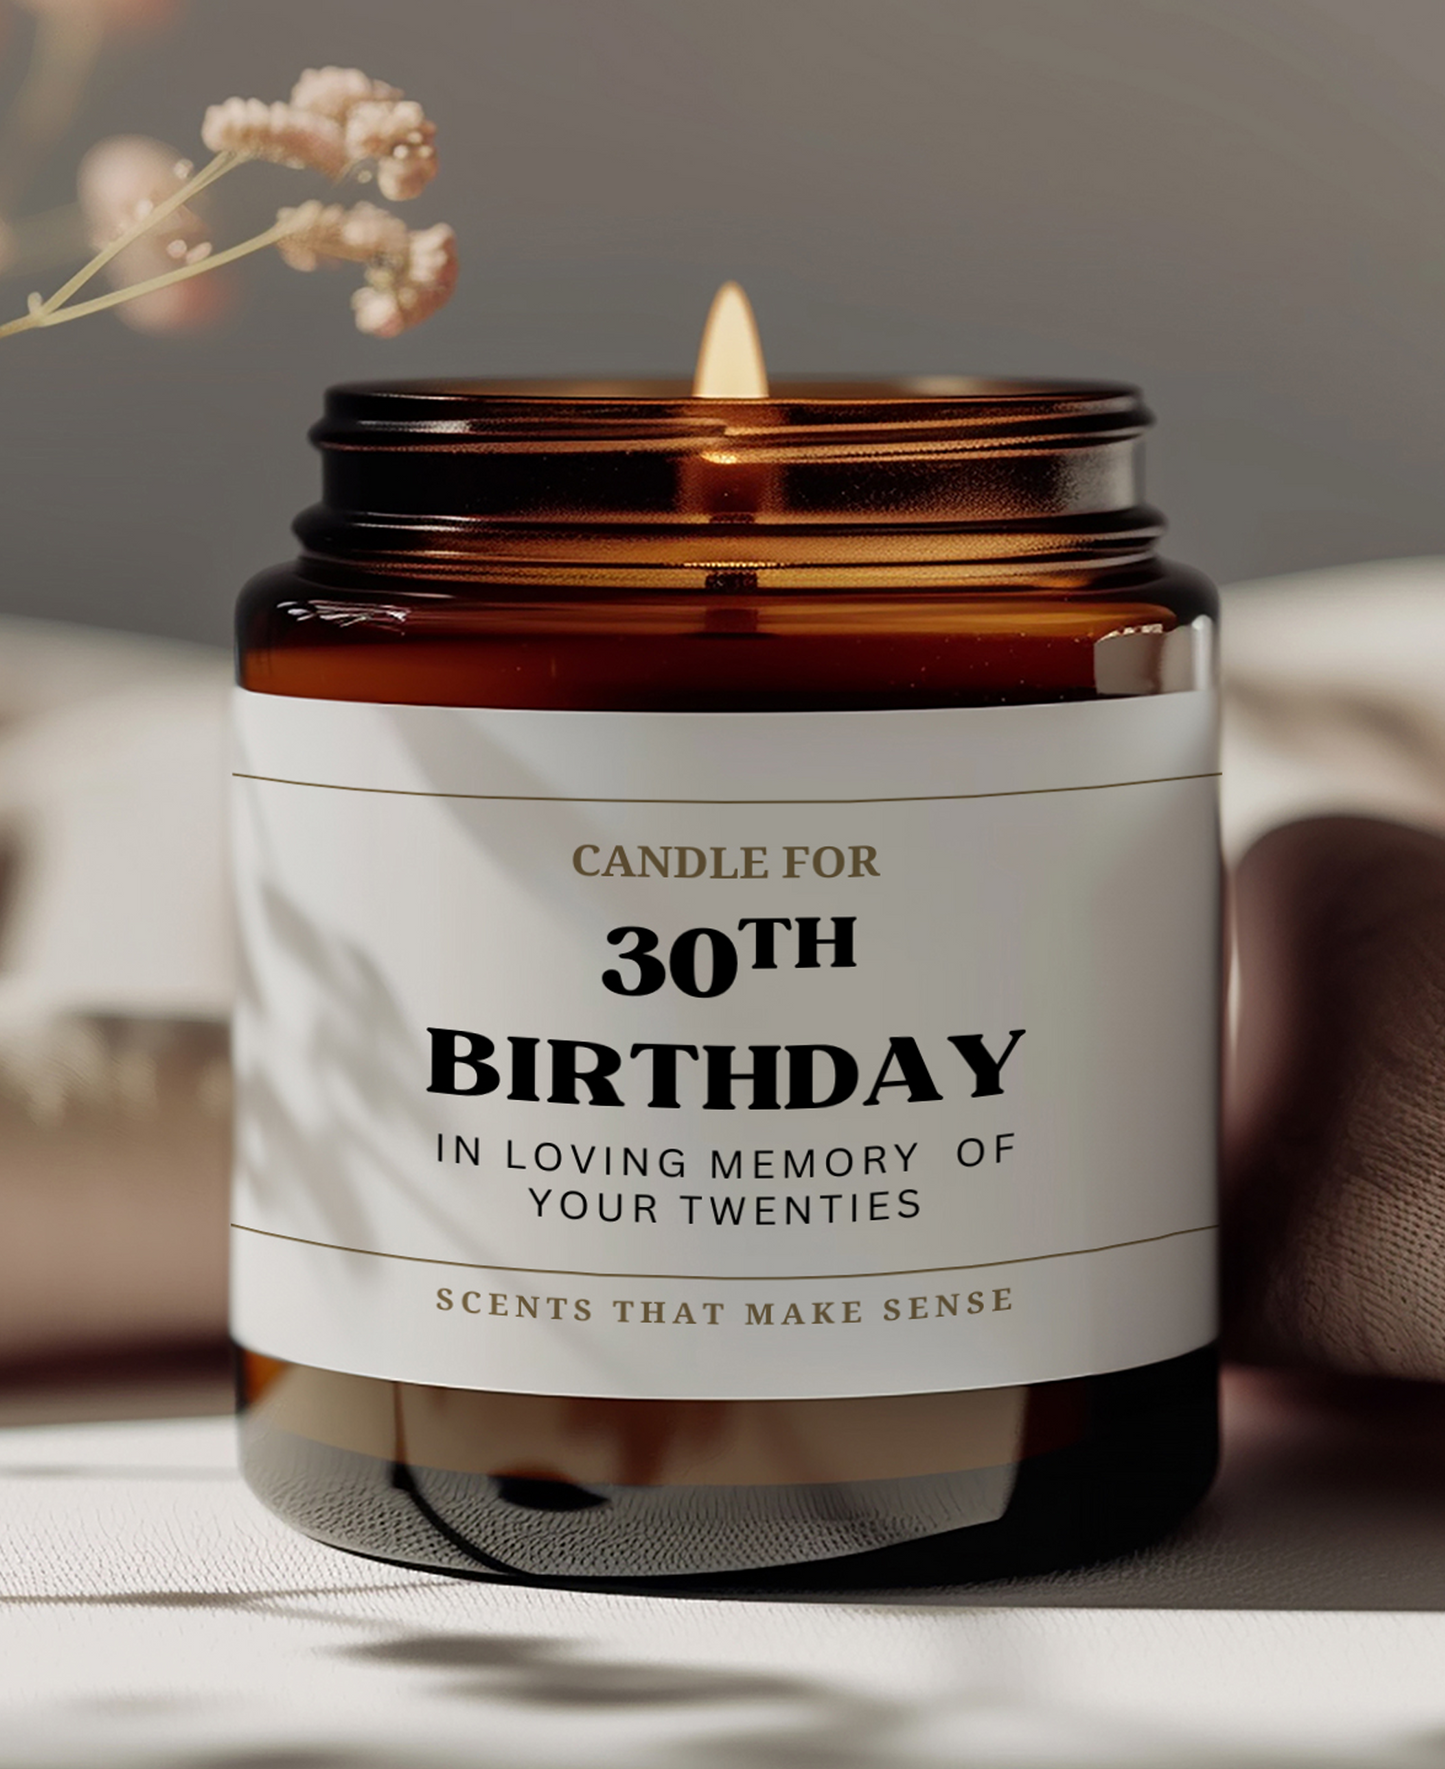 funny candle gift for her 30th birthday the funny candle reads candle for 30th birthda in loving memory of your twenties